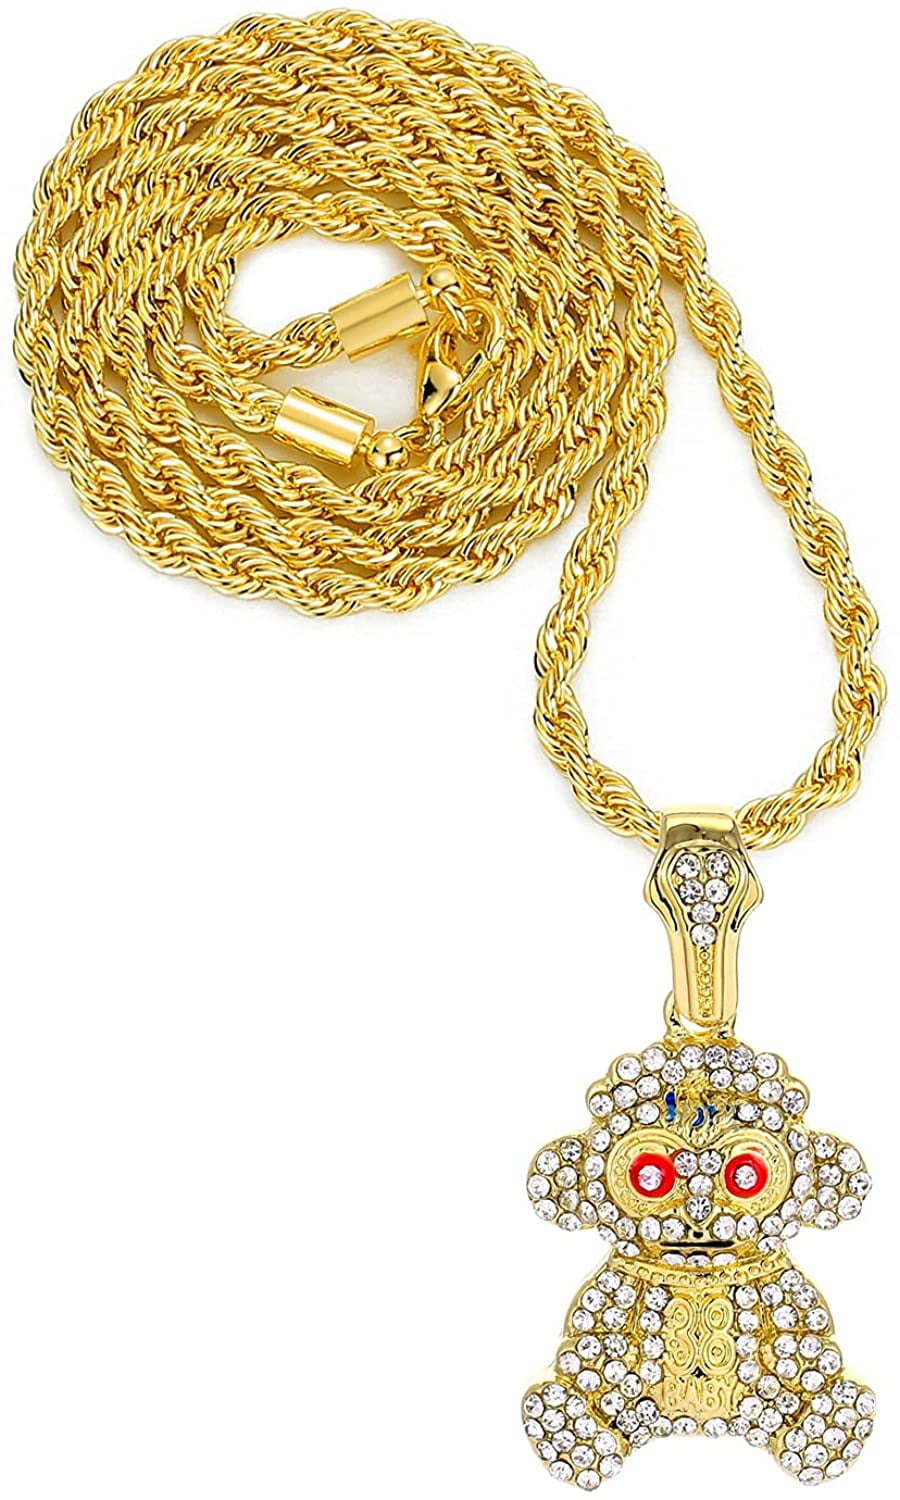 HH BLING EMPIRE Iced Out Nba Pendant Silver Gold Vietnam